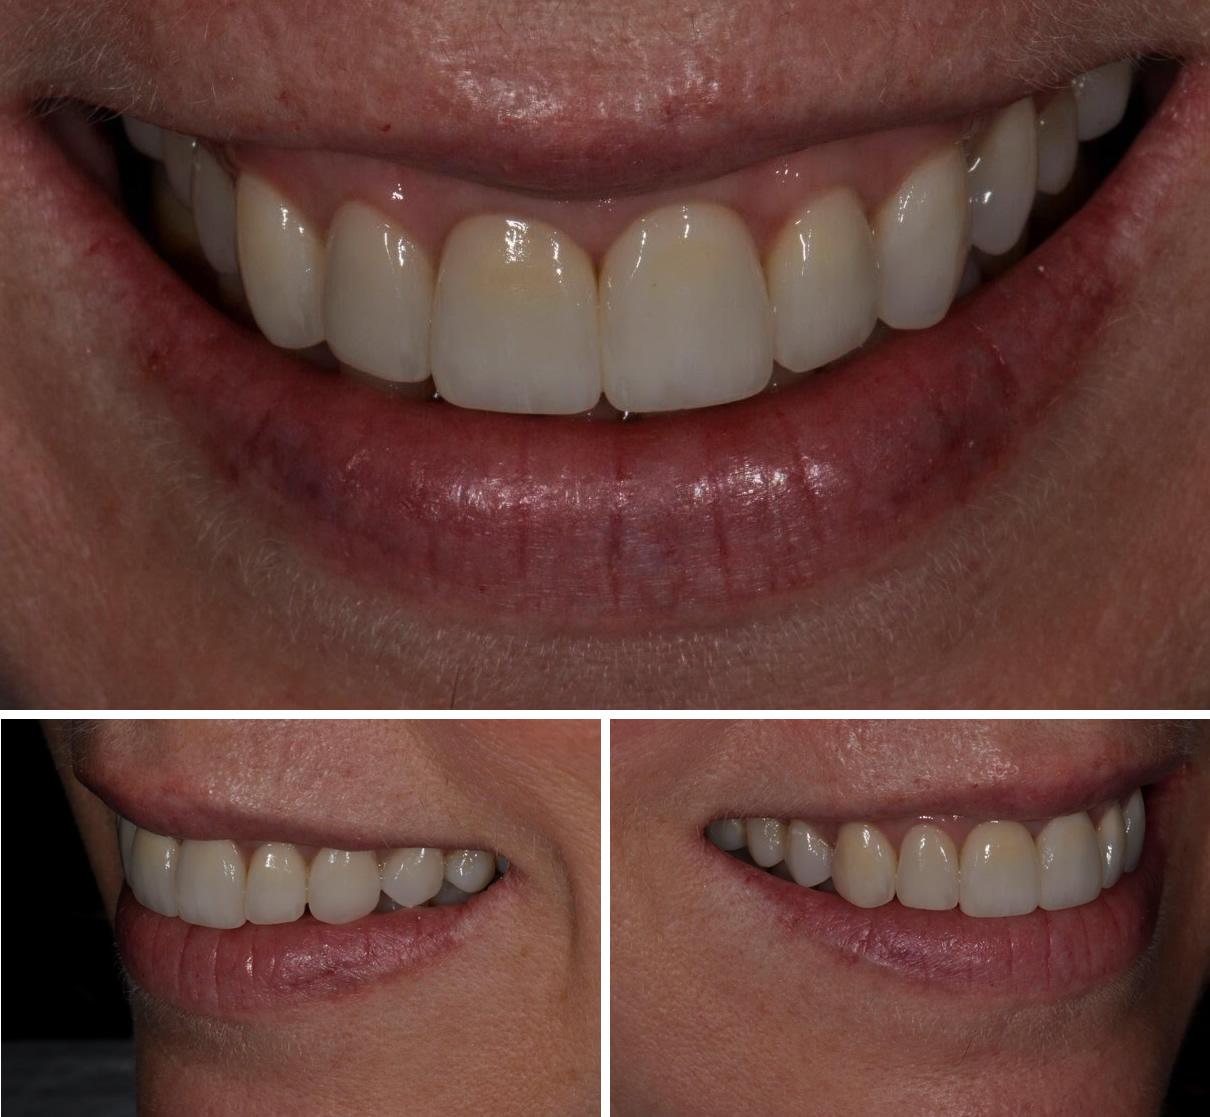 Replacement of Existing Dentistry - After